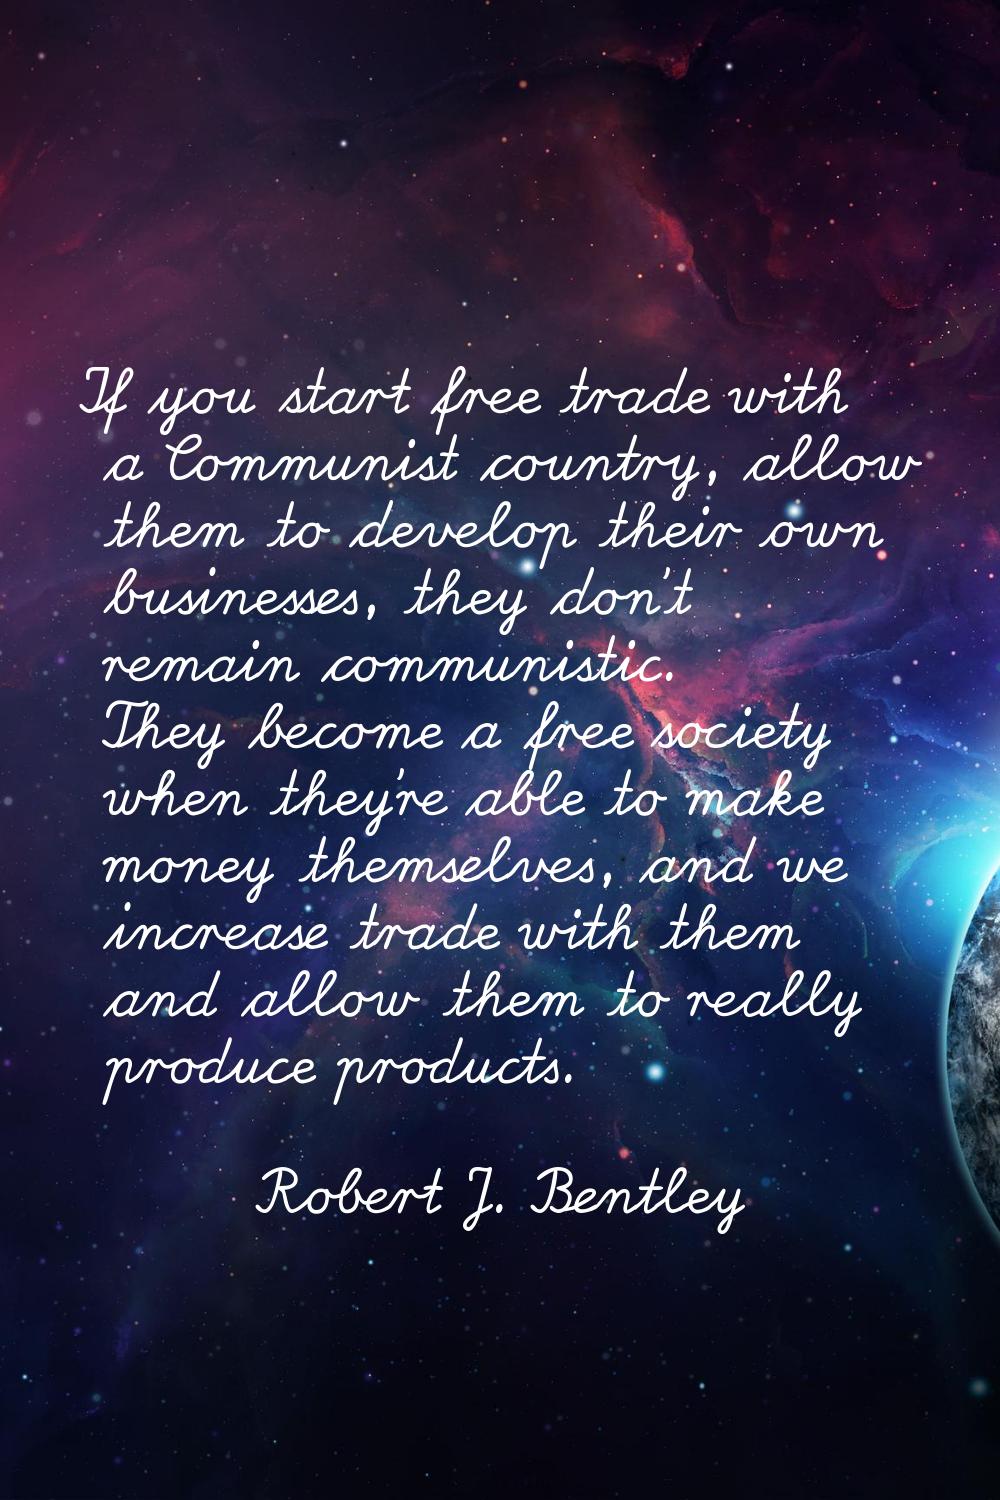 If you start free trade with a Communist country, allow them to develop their own businesses, they 